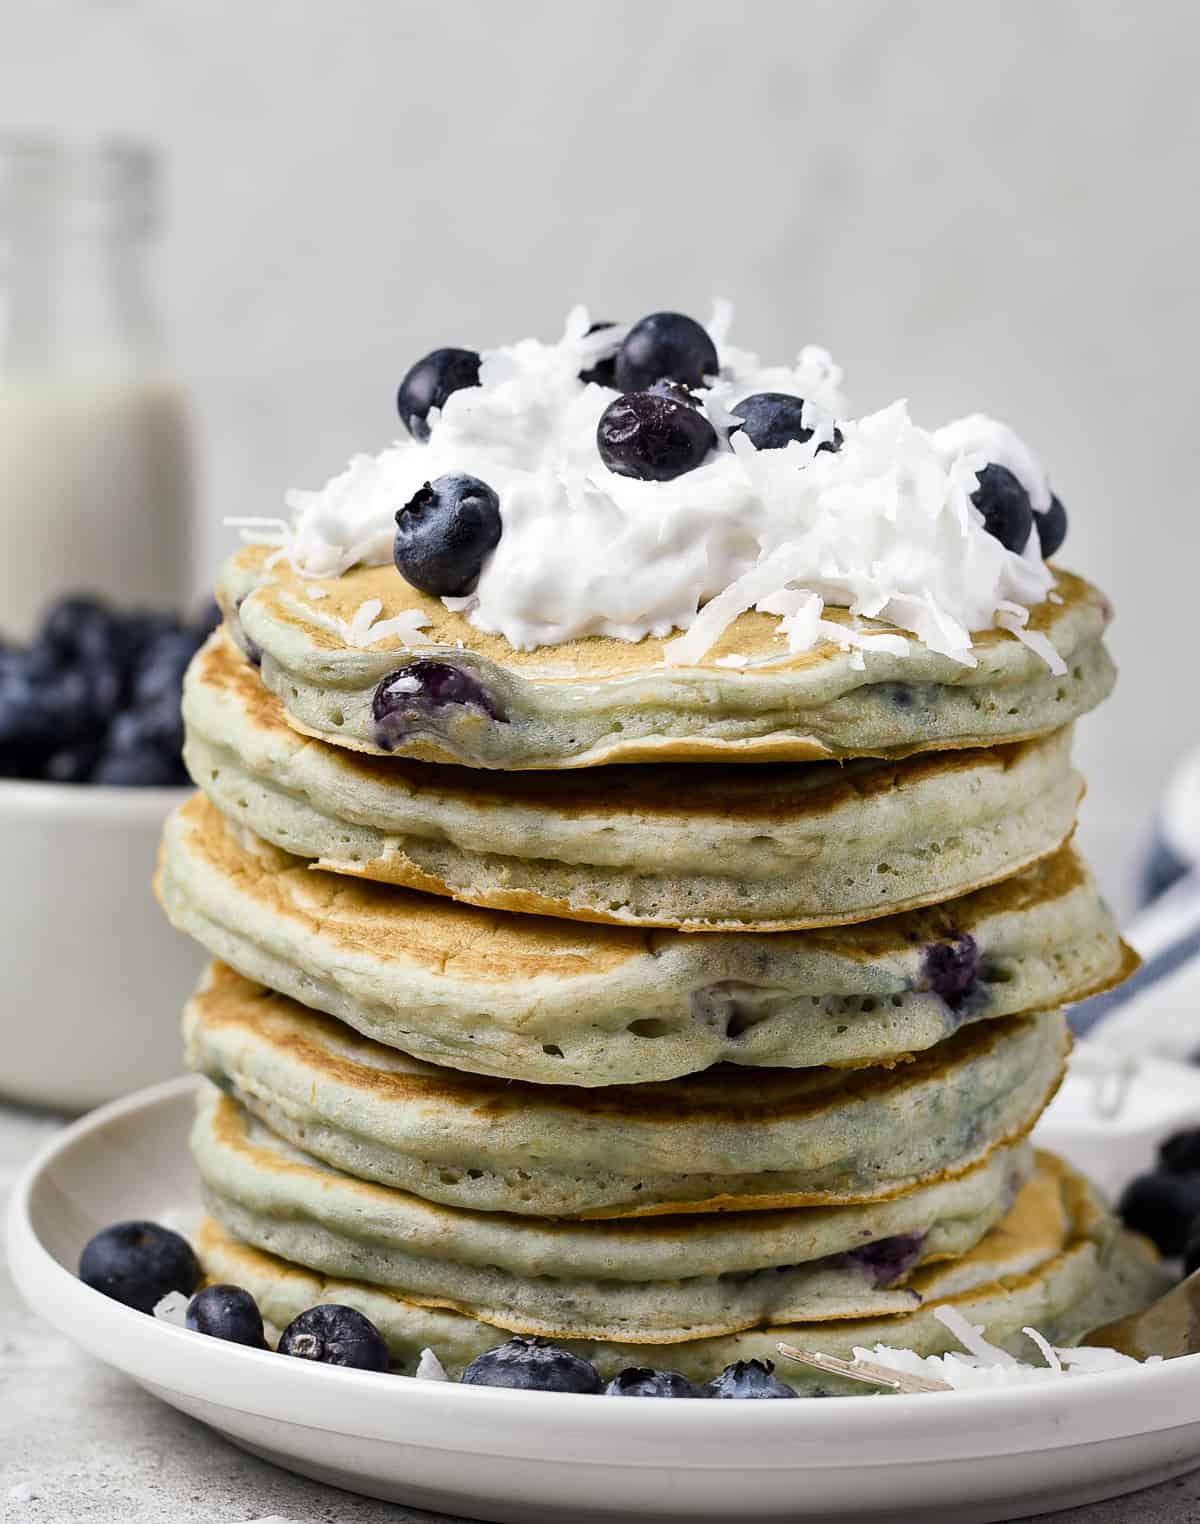 Pancakes with blueberries and whipped cream on top.